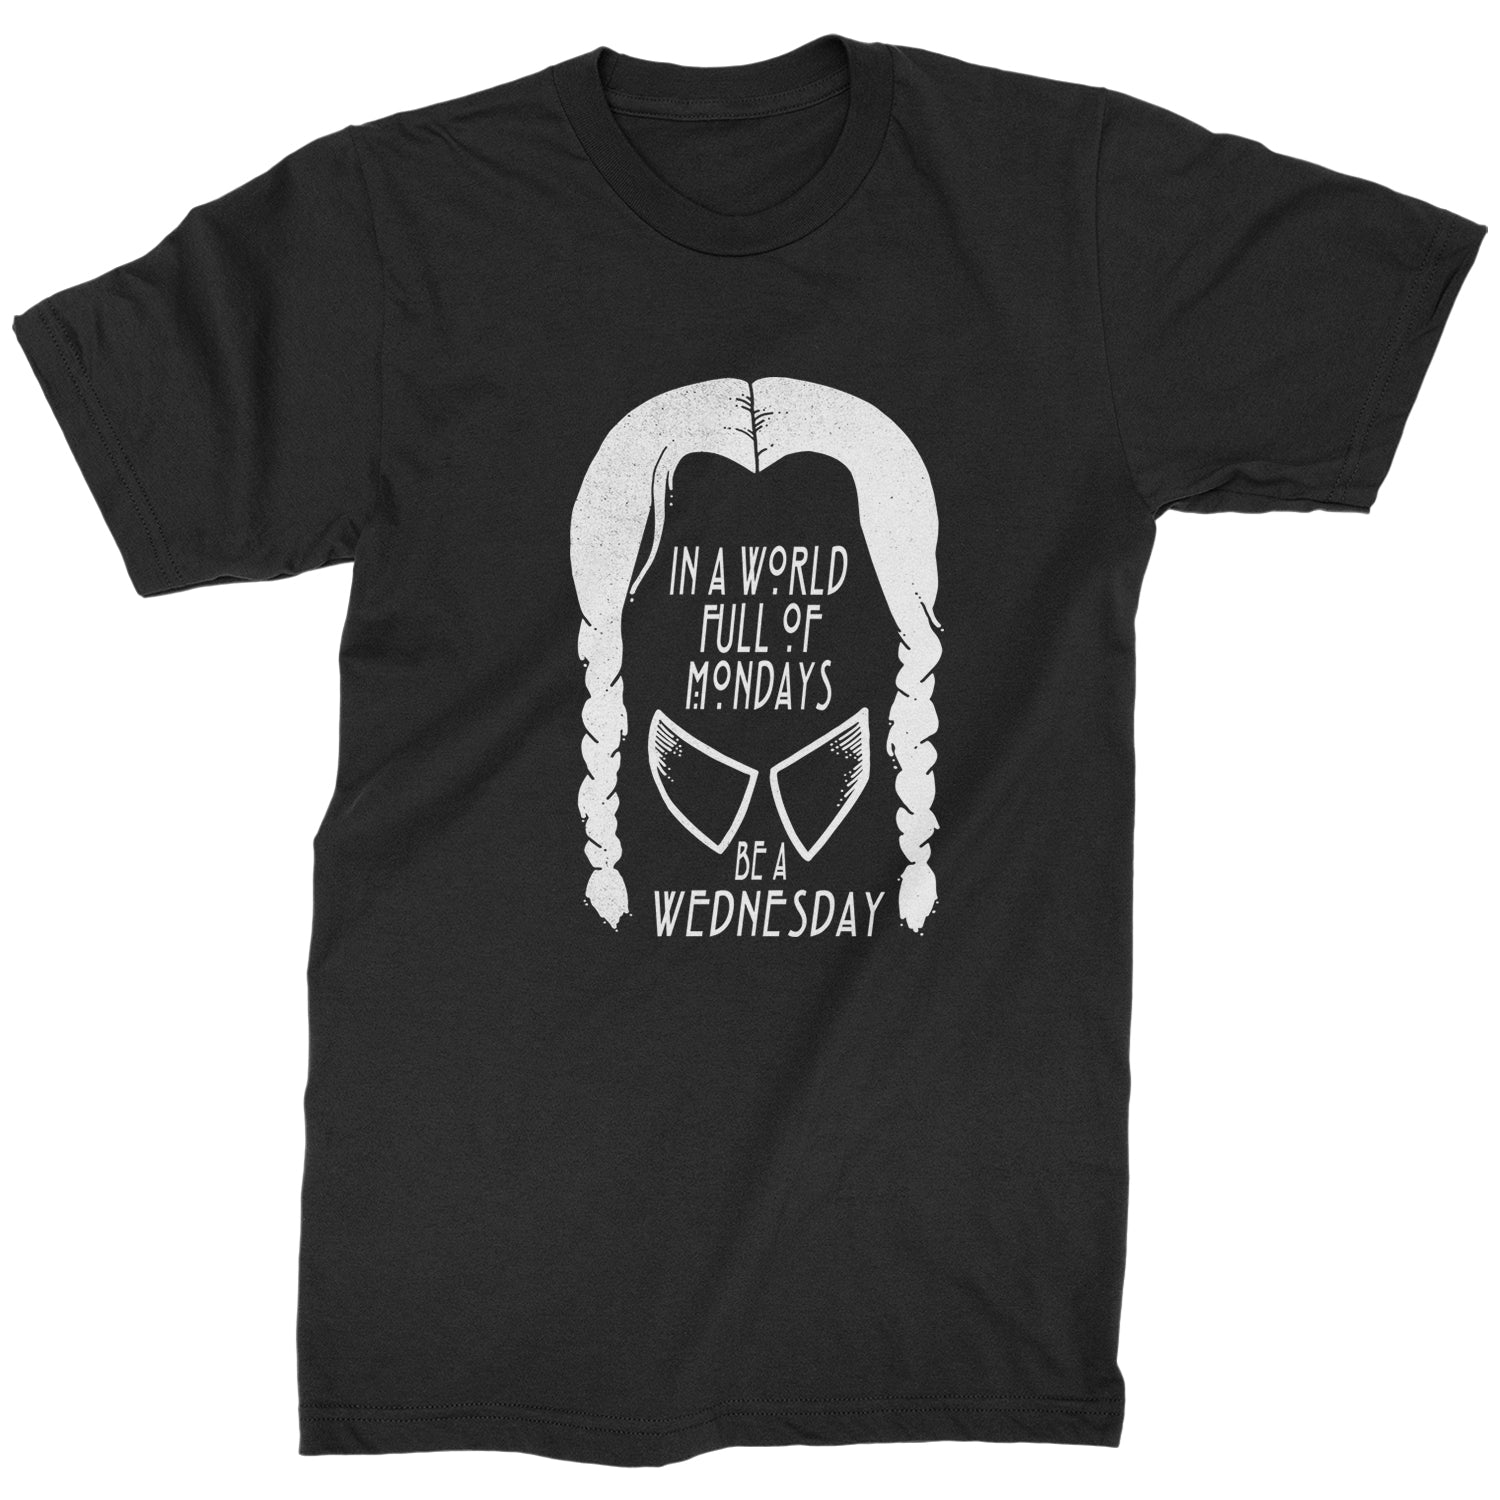 In A World Full Of Mondays, Be A Wednesday Mens T-shirt academy, jericho, more, never, nevermore, vermont, Wednesday by Expression Tees